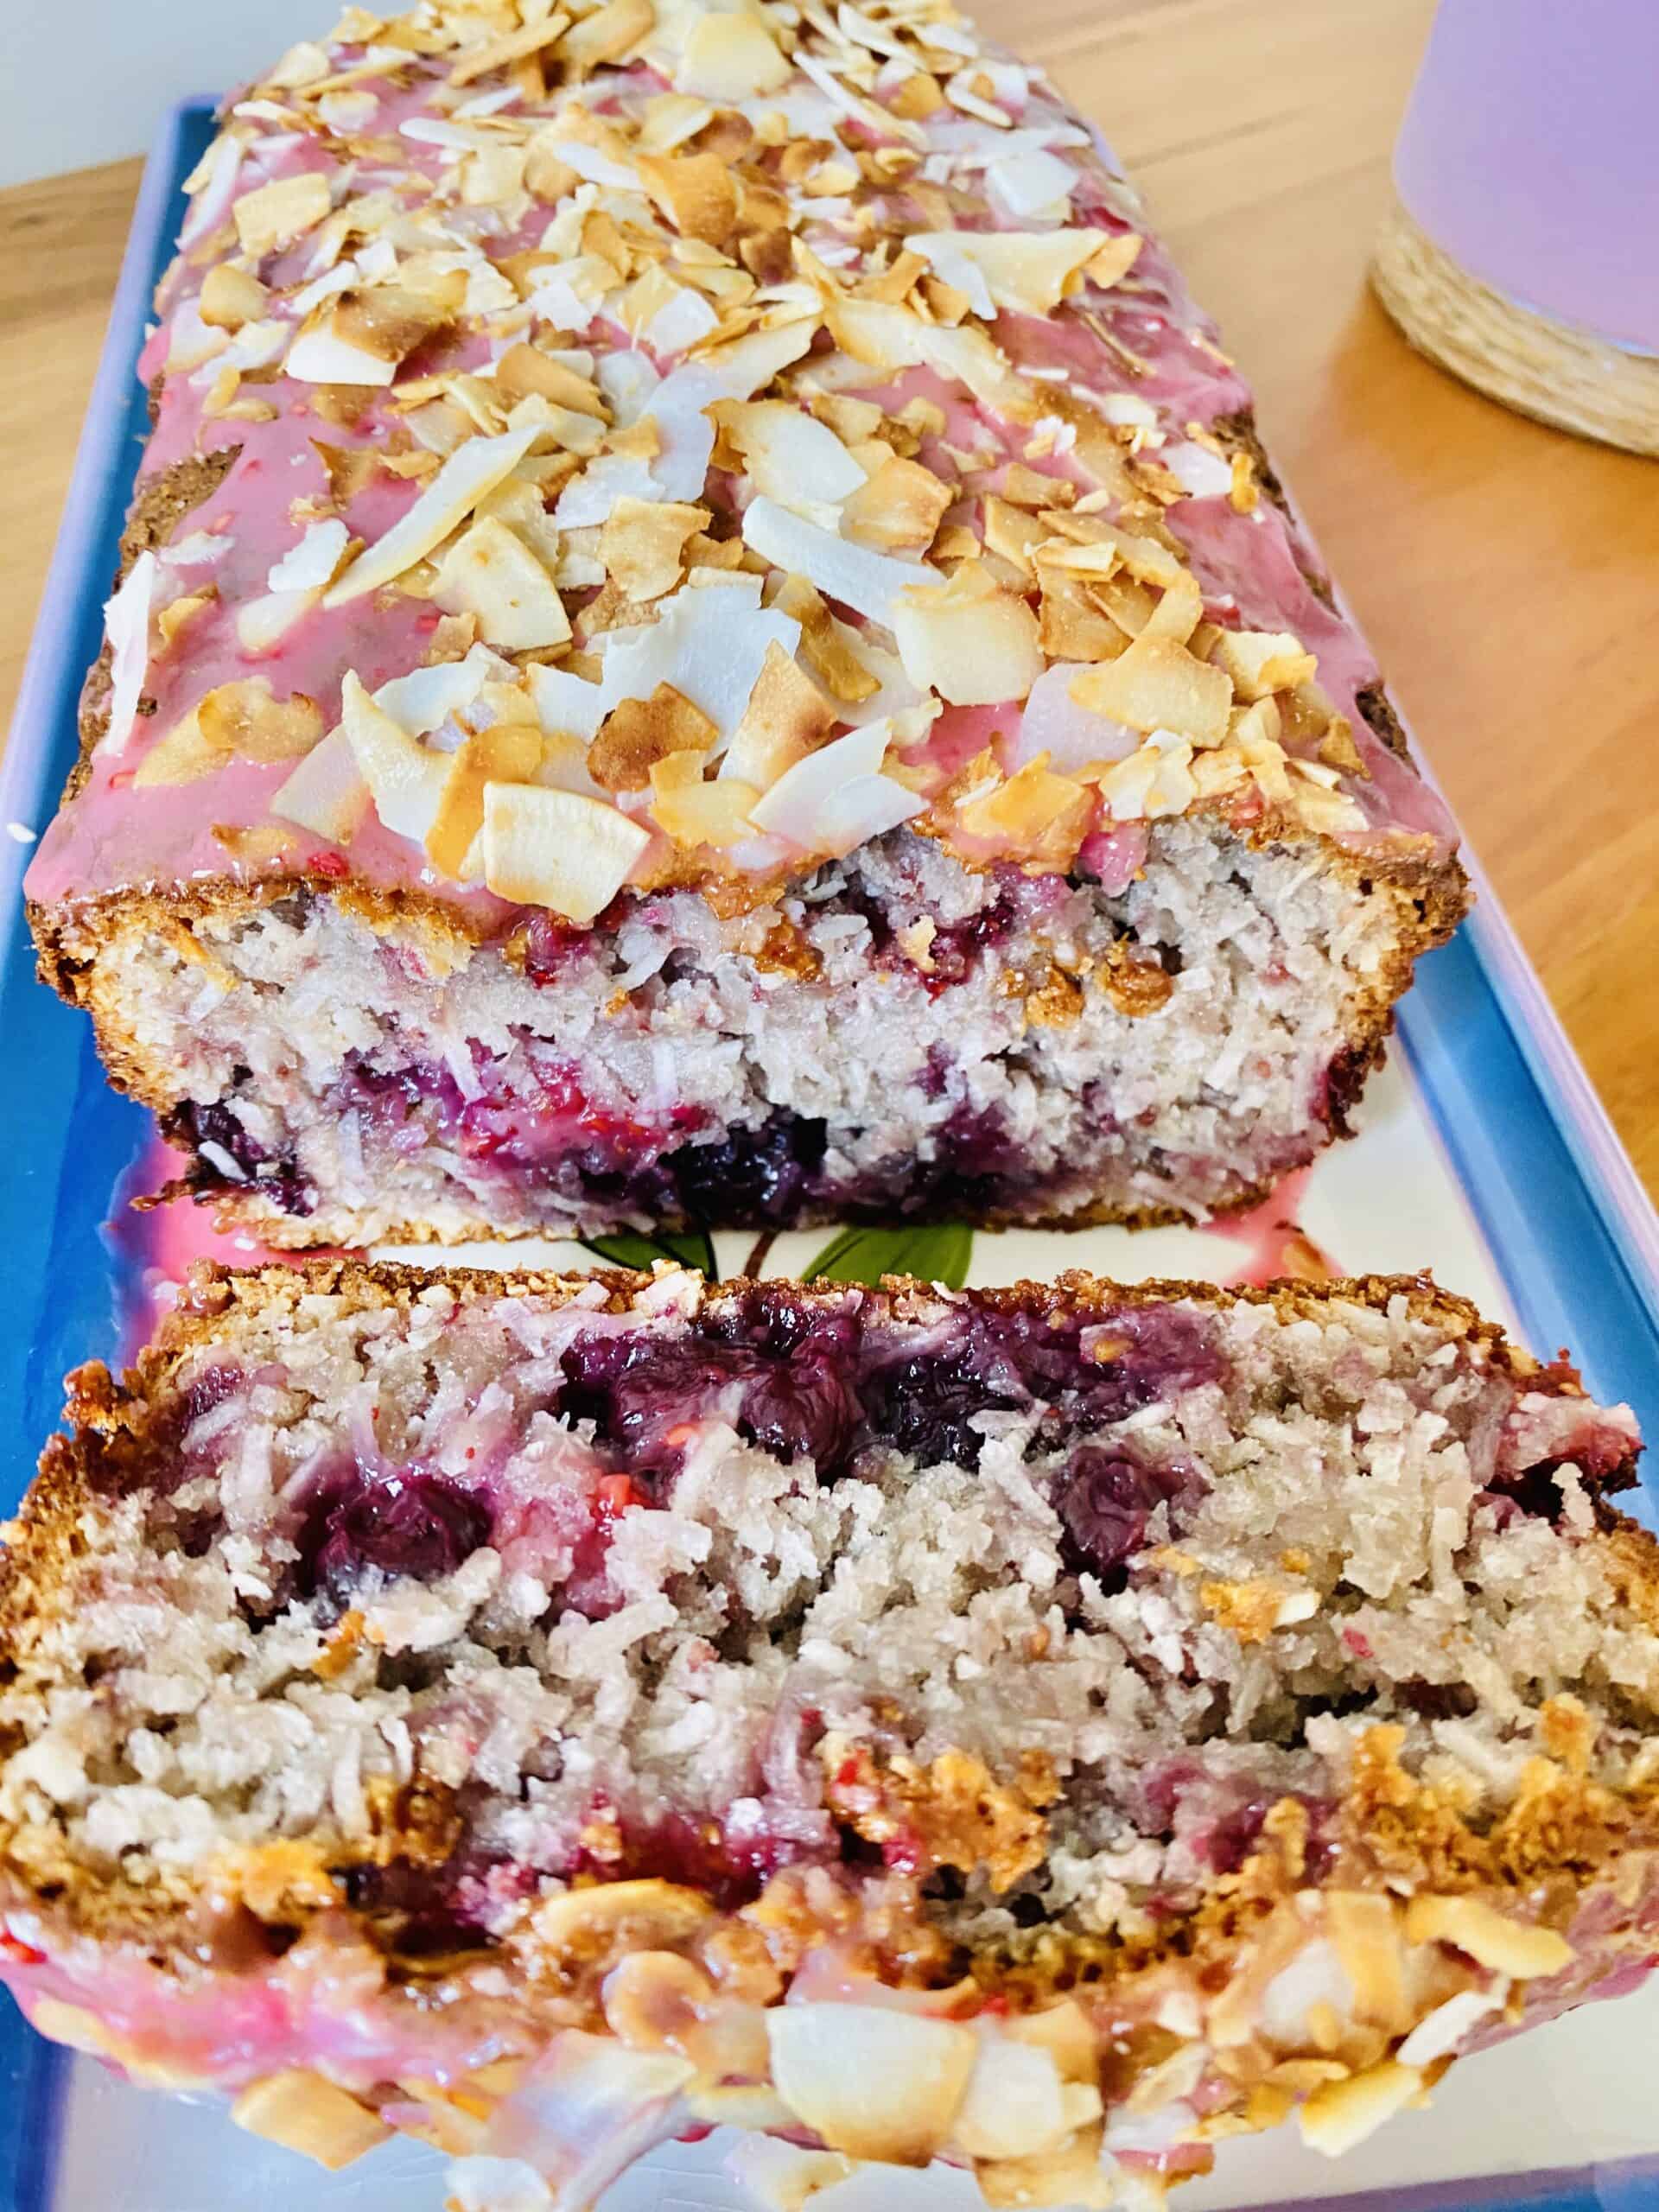 Raspberry and Coconut Loaf Cake